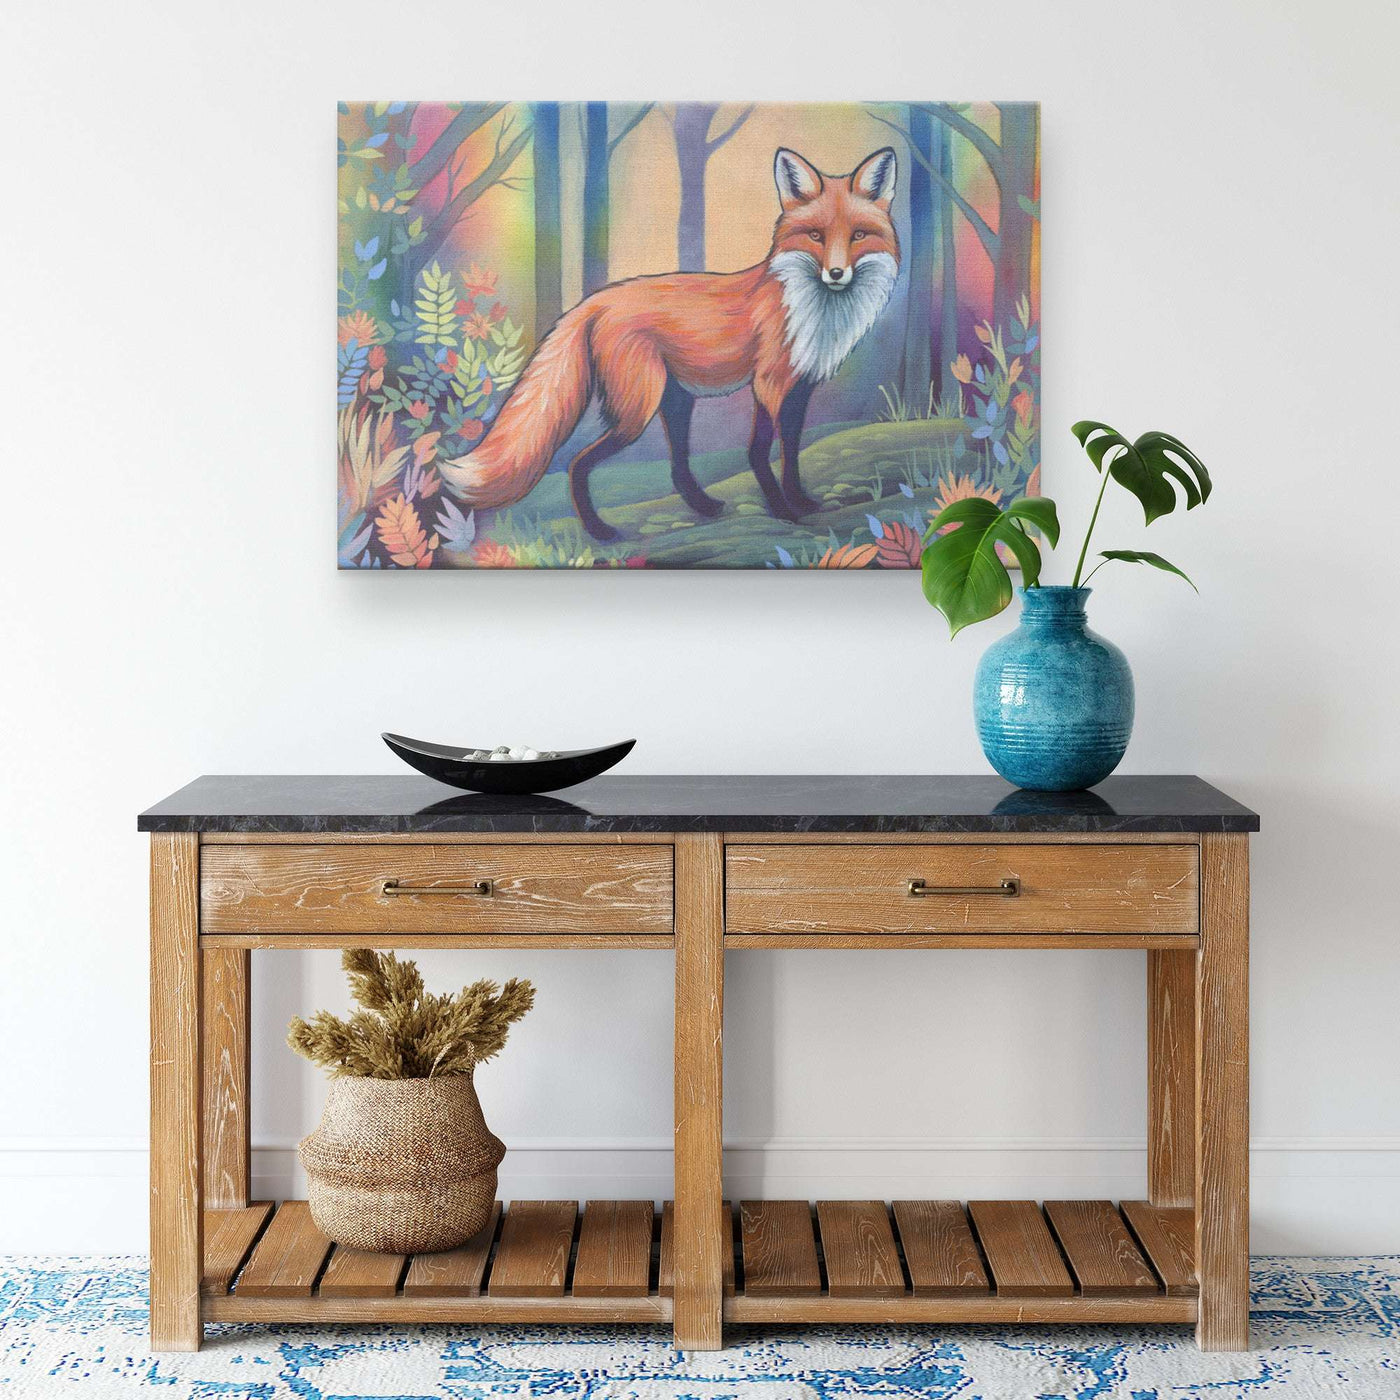 A wooden console table with a blue vase and green plant on top, set against a white wall featuring a Canvas Fox Print.